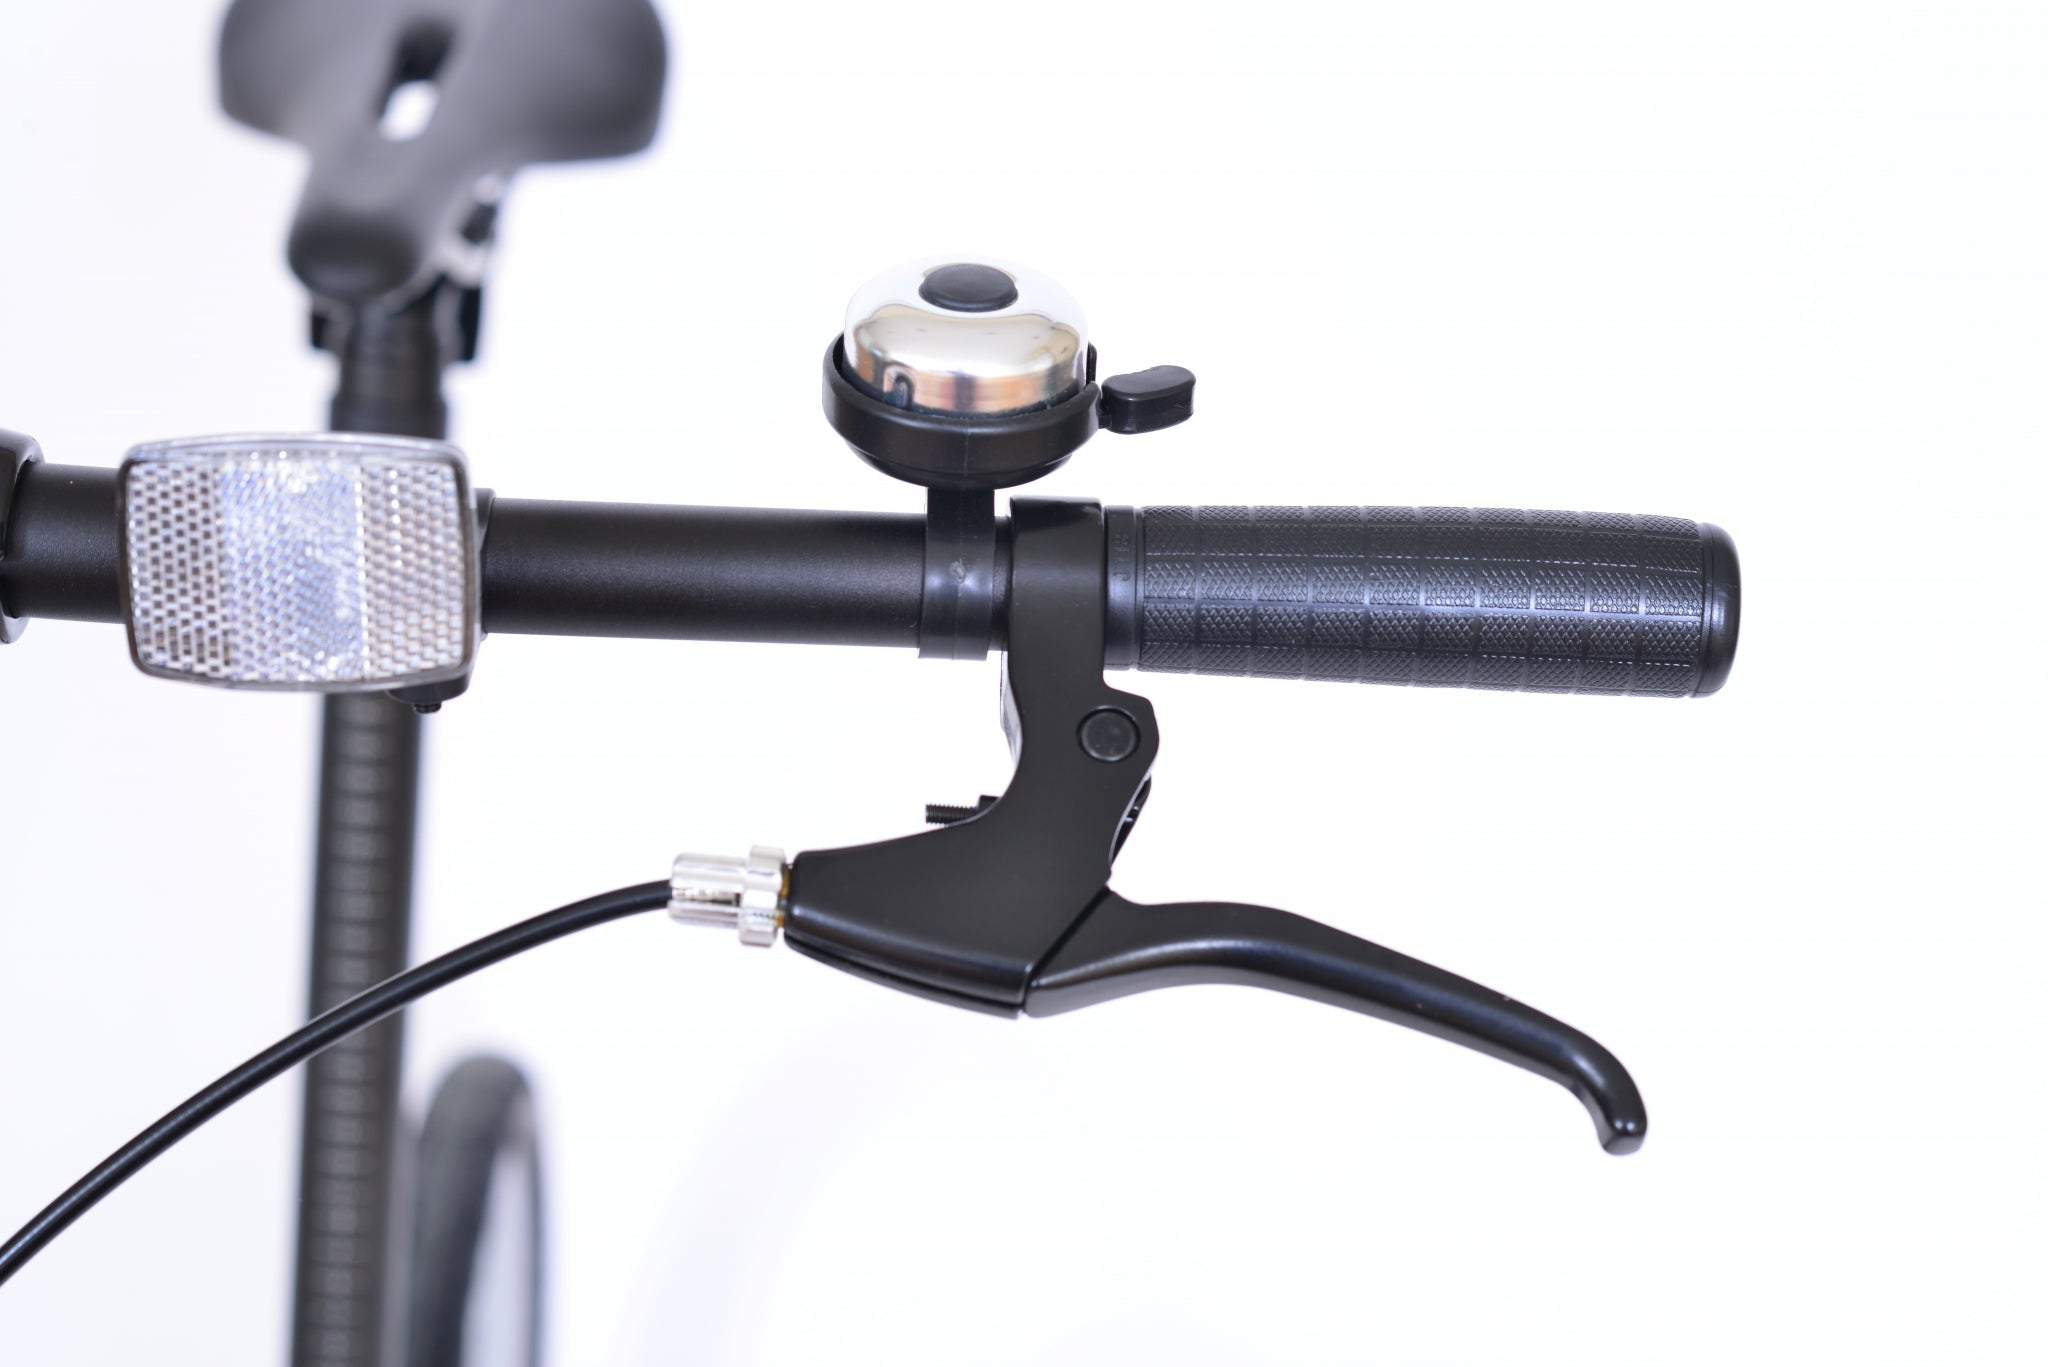 Left handlebar of a bicycle.